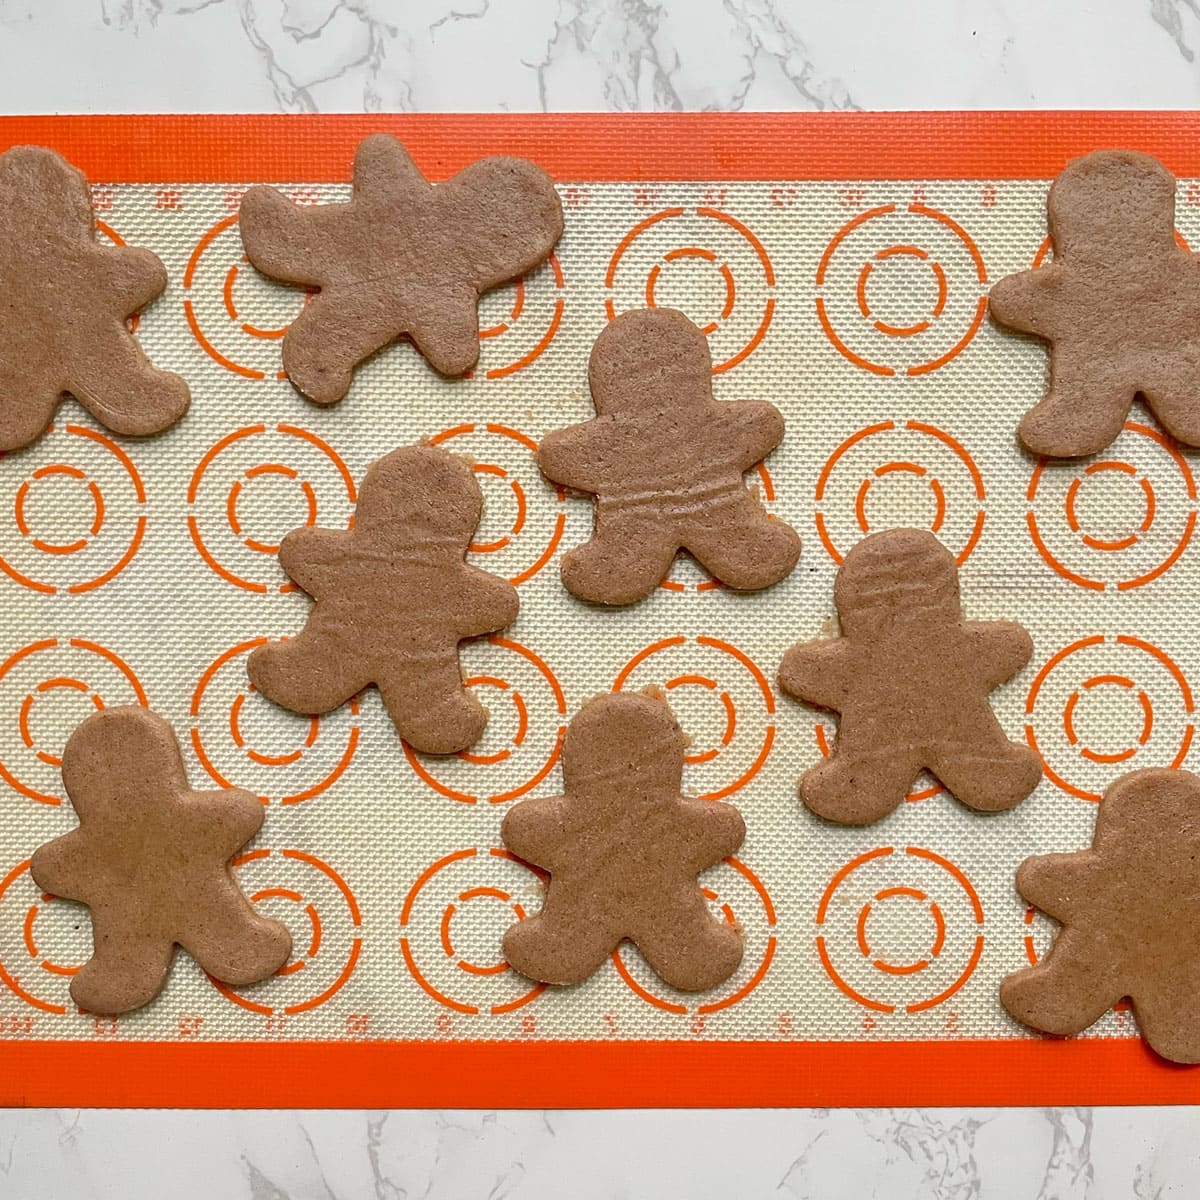 Gingerbread cookie cutouts on a mat.